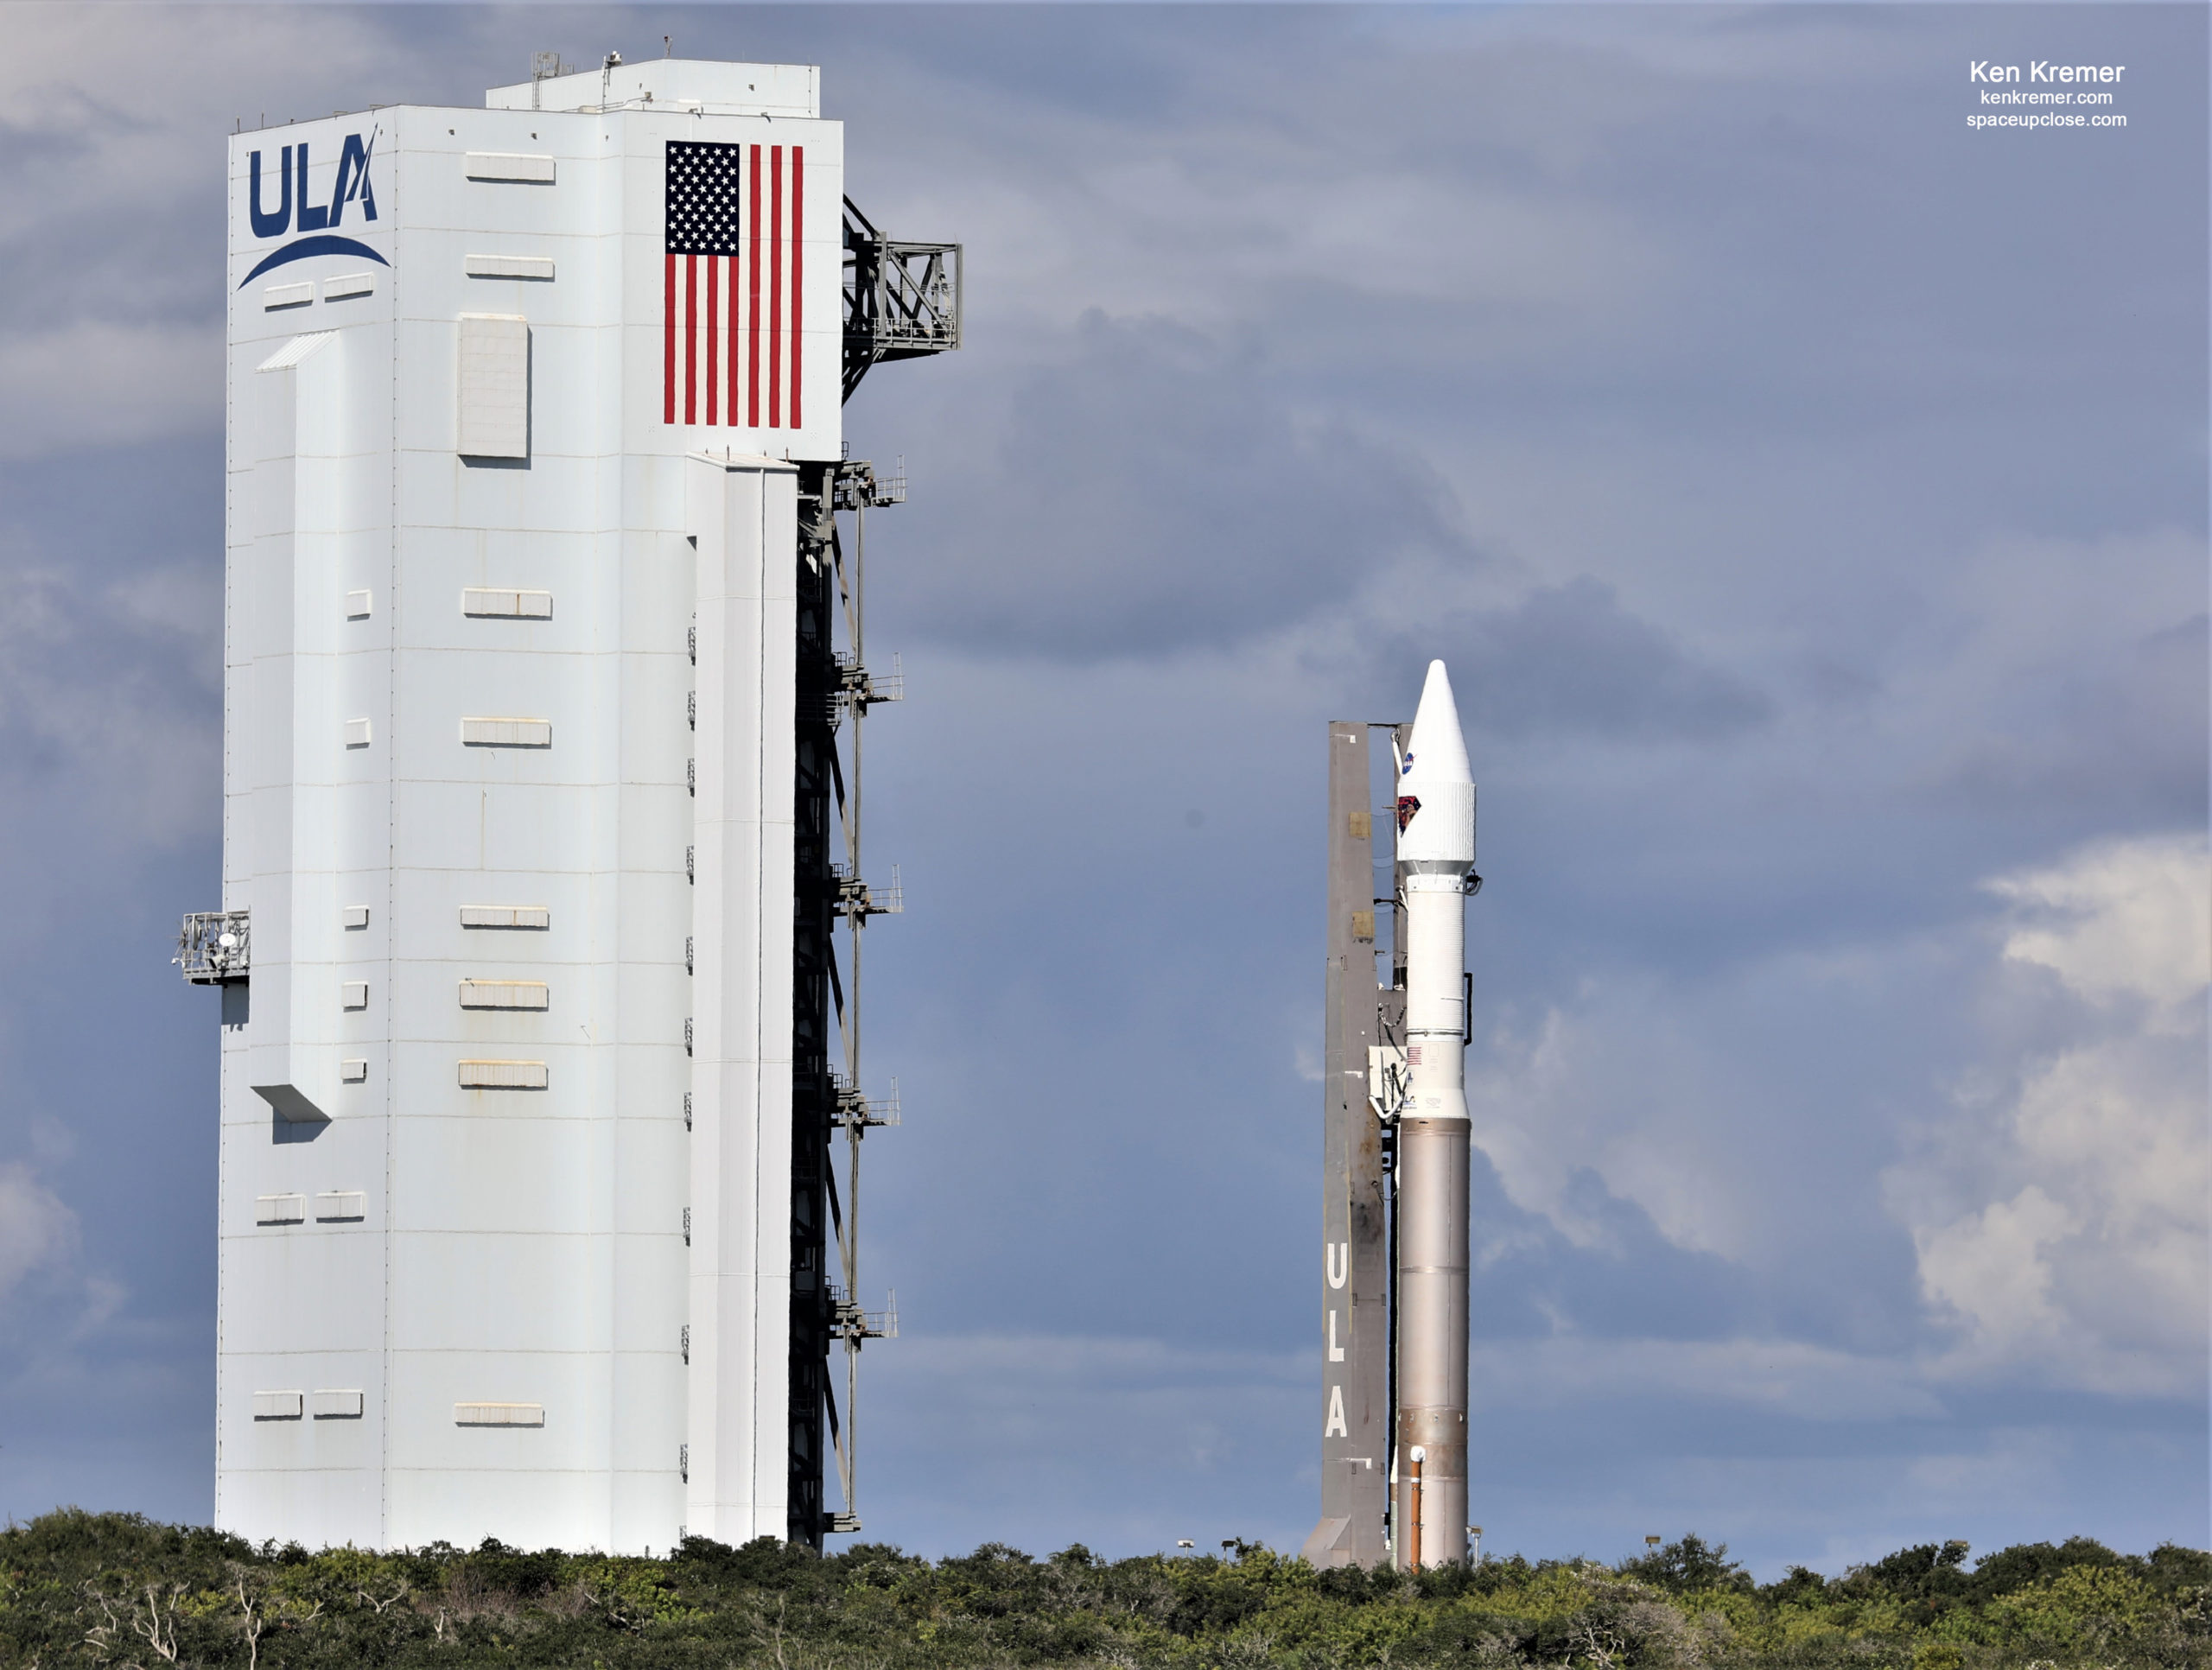 NASA Lucy Asteroid Mission Rolls out to Pad for Oct. 16 Launch on ULA Atlas V: Photos